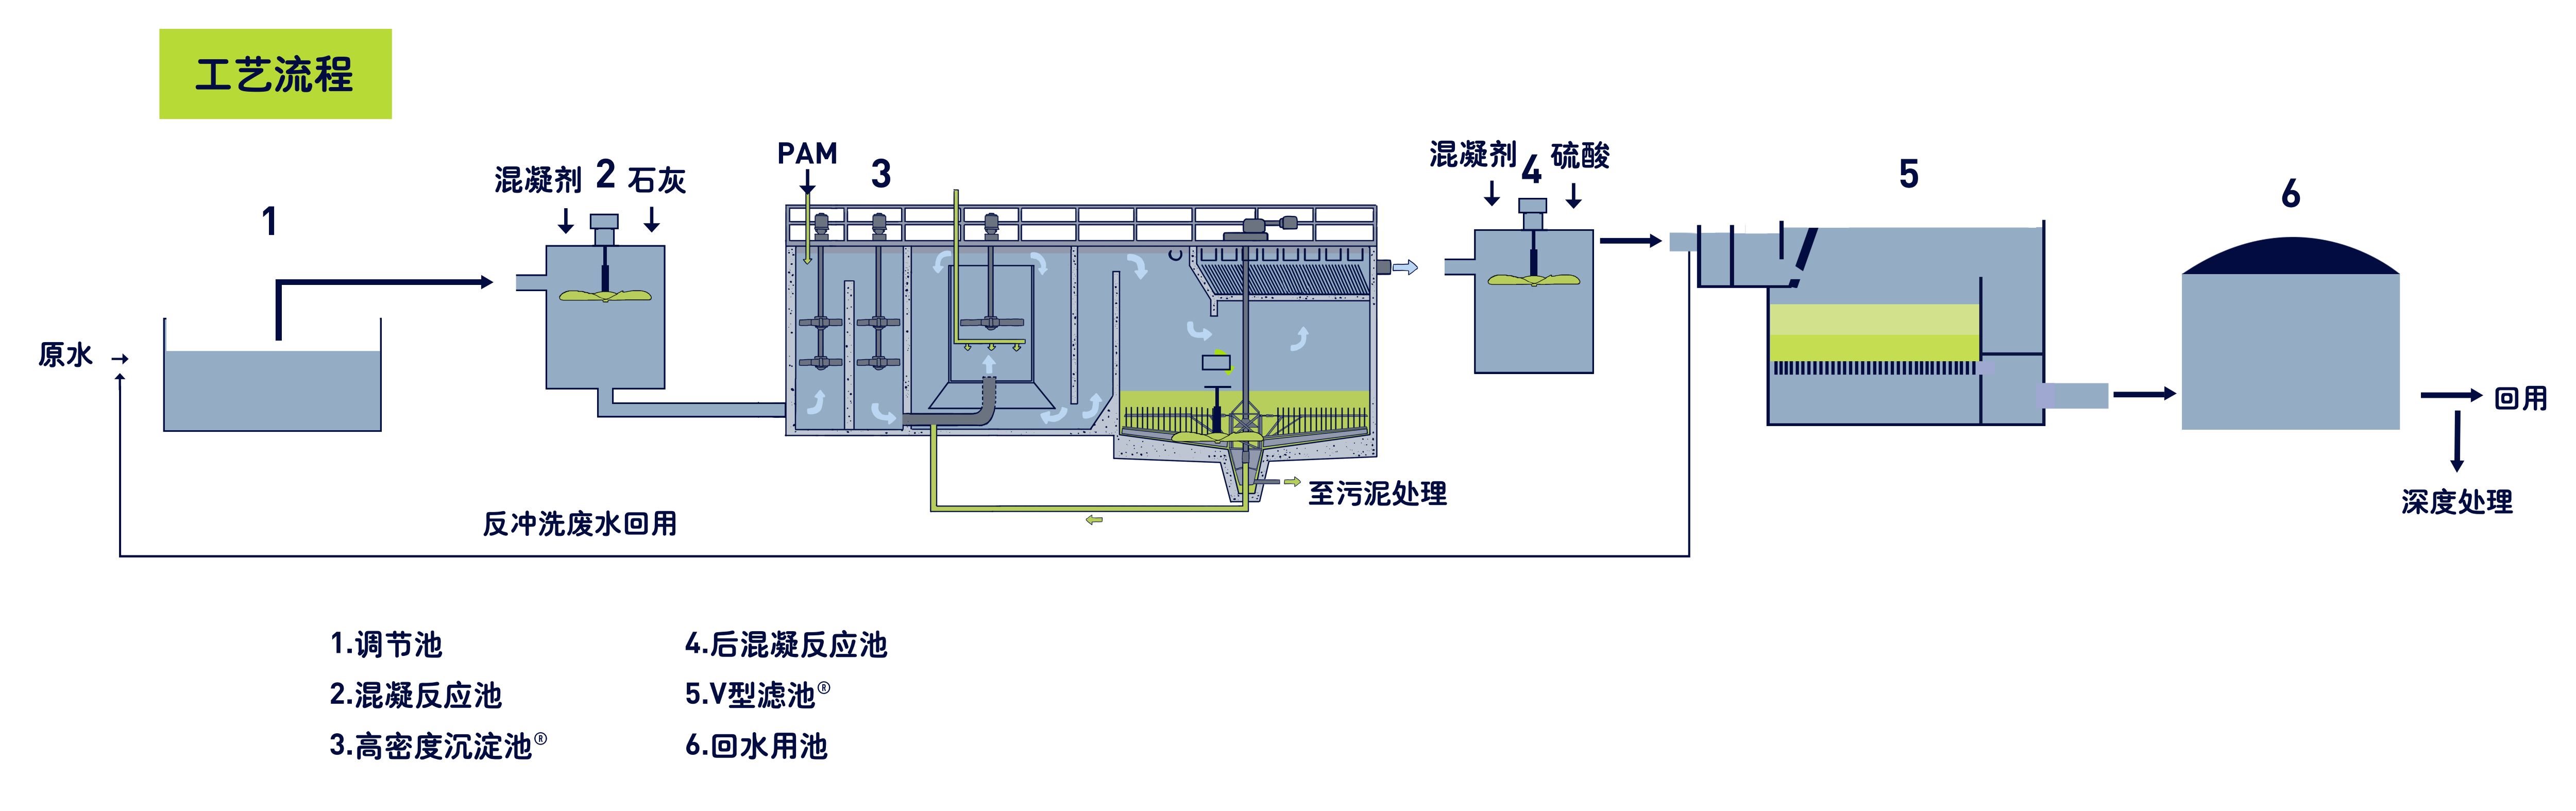 Tangshan Steel wastewater project